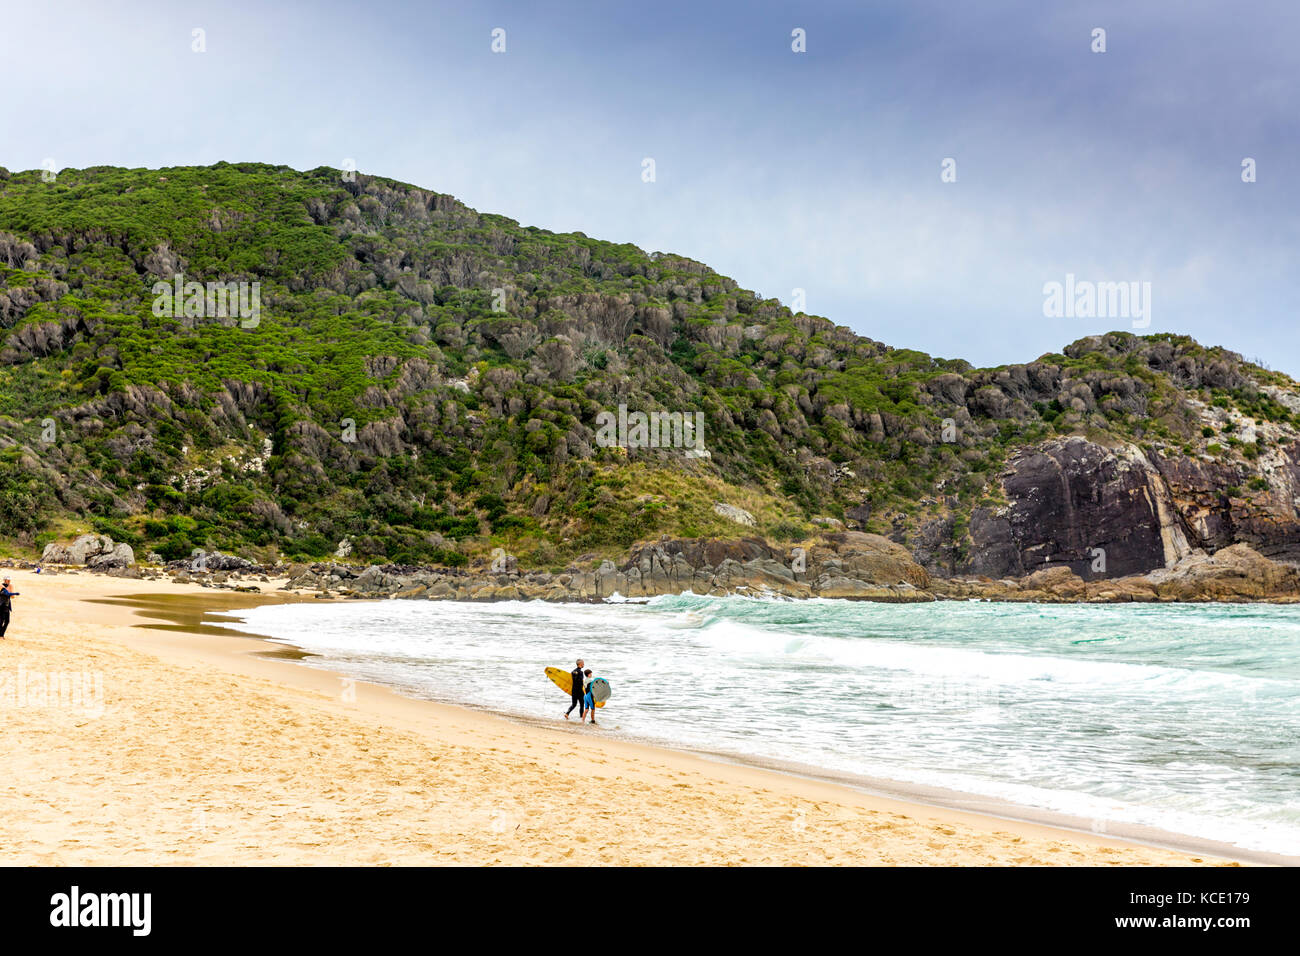 Surfers on Boomerang beach in Pacific Palms part of Booti Booti national park, on the mid north coast of New South Wales,Australia Stock Photo